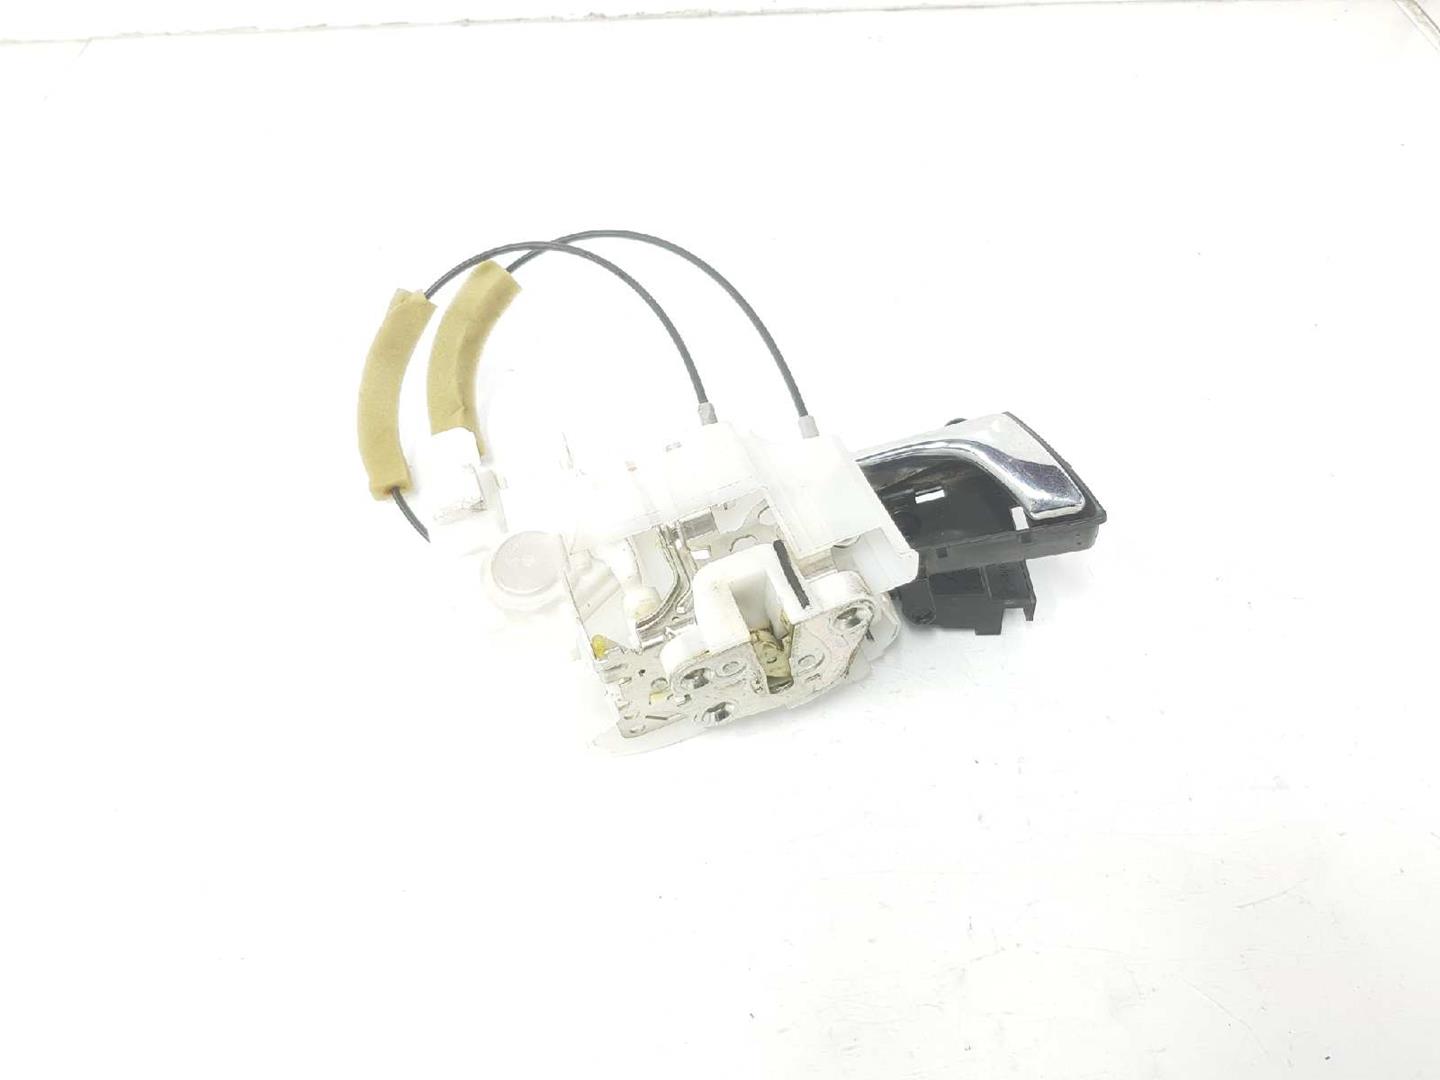 SUBARU Outback 3 generation (2003-2009) Front Right Door Lock 61032AG100, 61032AG100 24118402